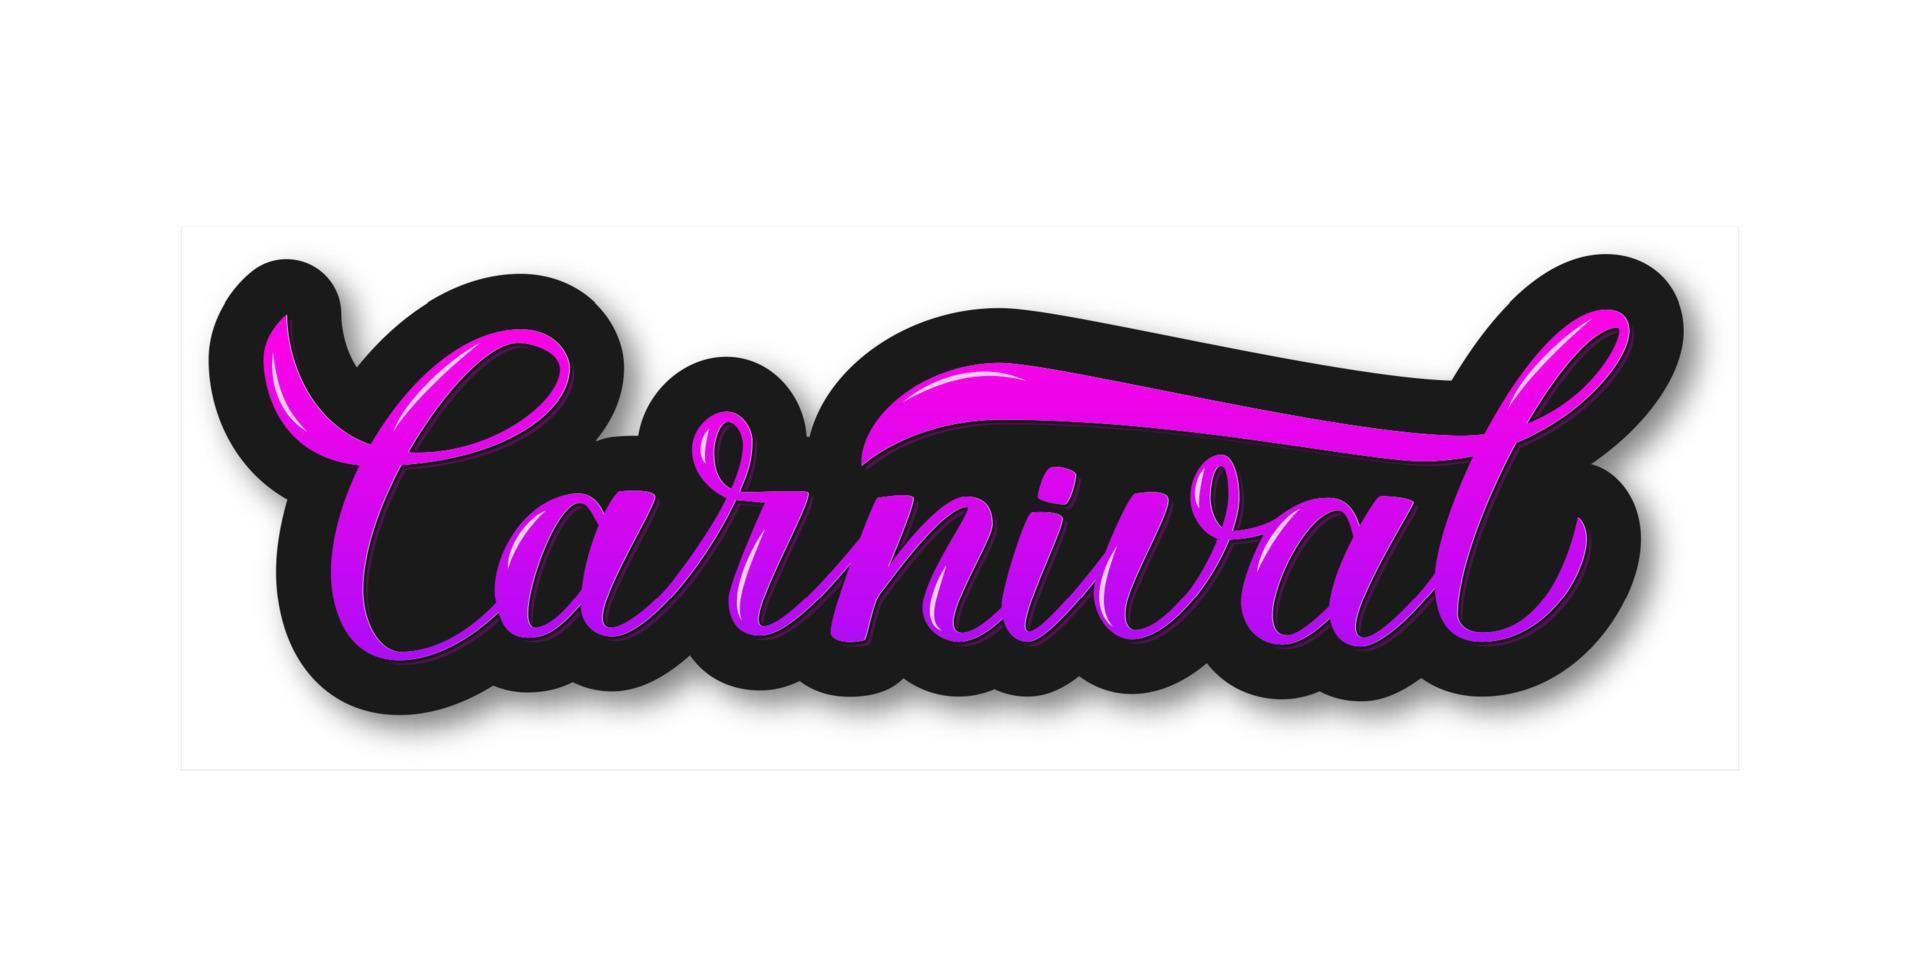 Carnival bright colorful 3d lettering. Easy to edit element of design for Brazilian carnival in Rio or Mardi Gras in New Orleans. Masquerade party banner, poster or invitation. Vector illustration.